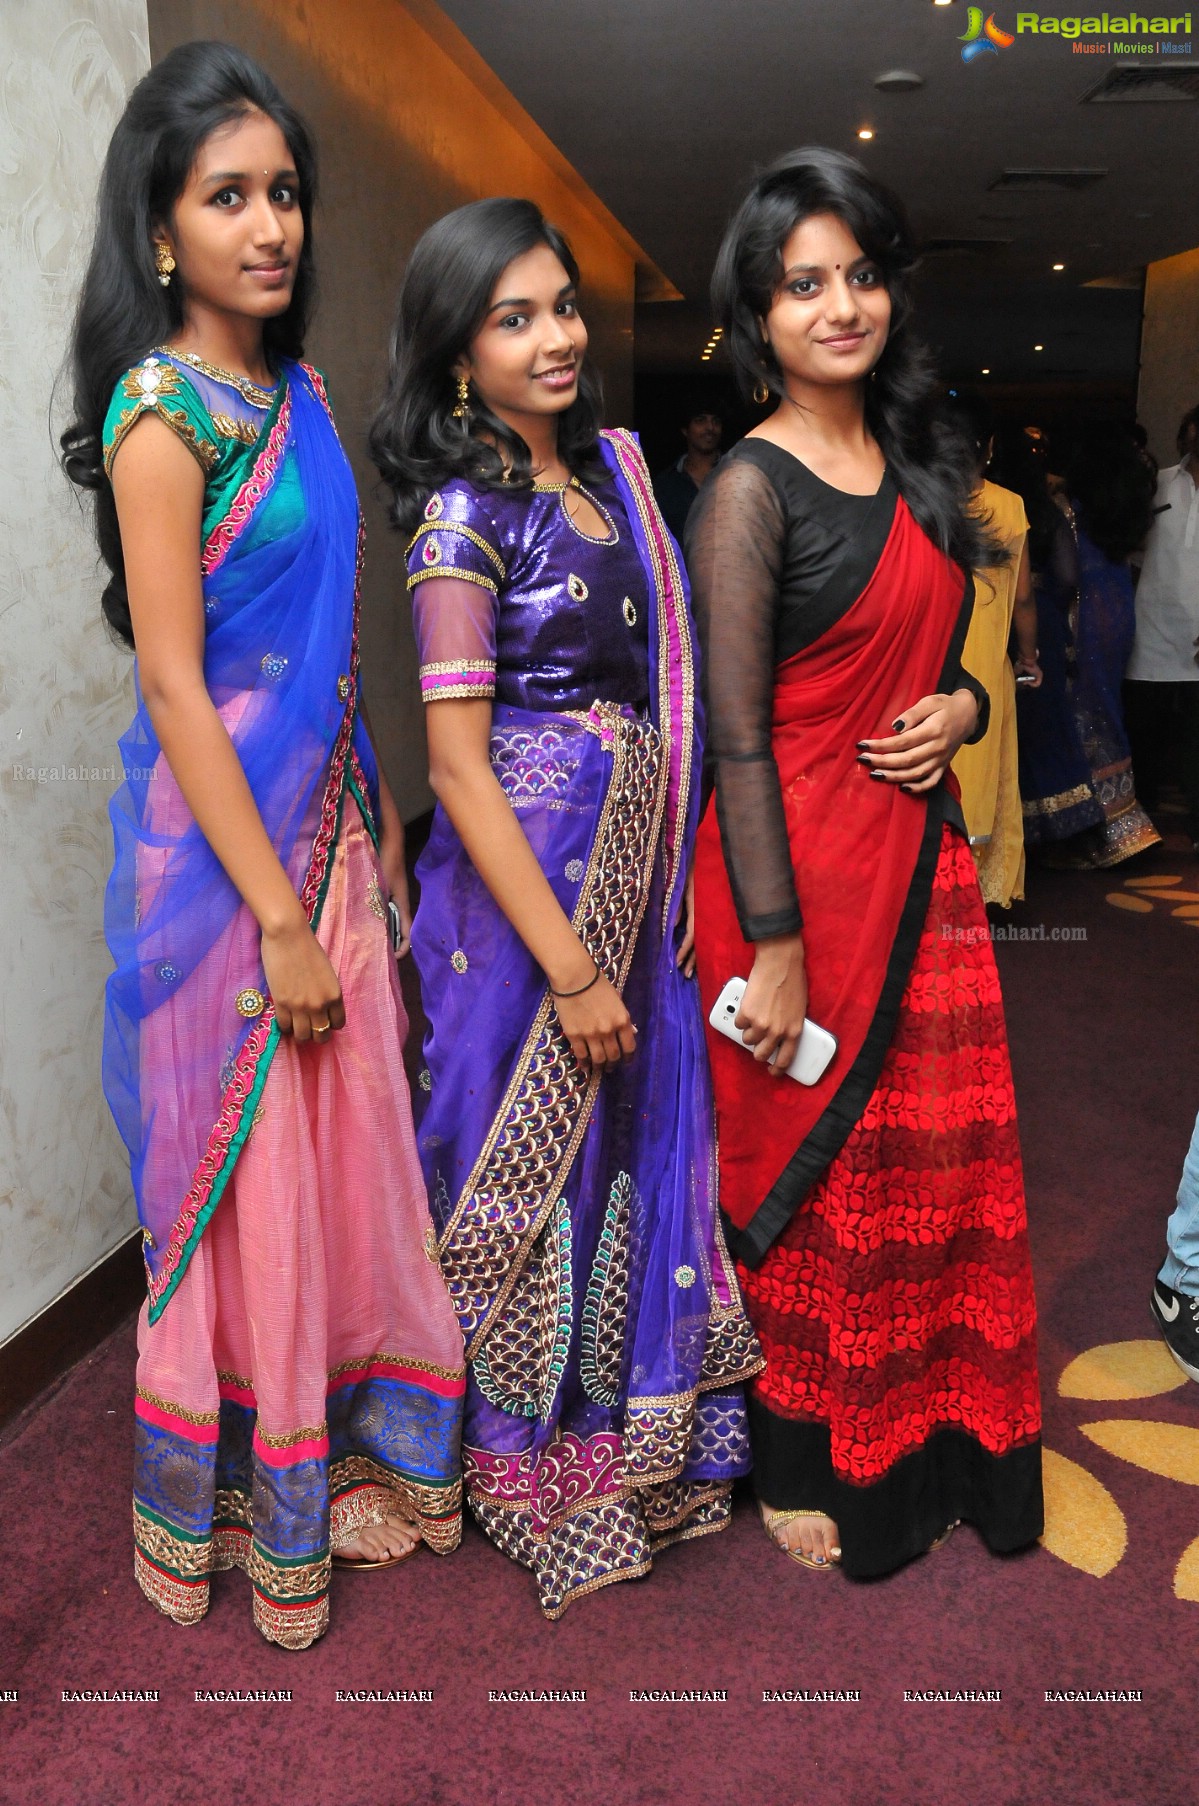 ROOTS Freshers Day Celebrations 2014, Hyderabad